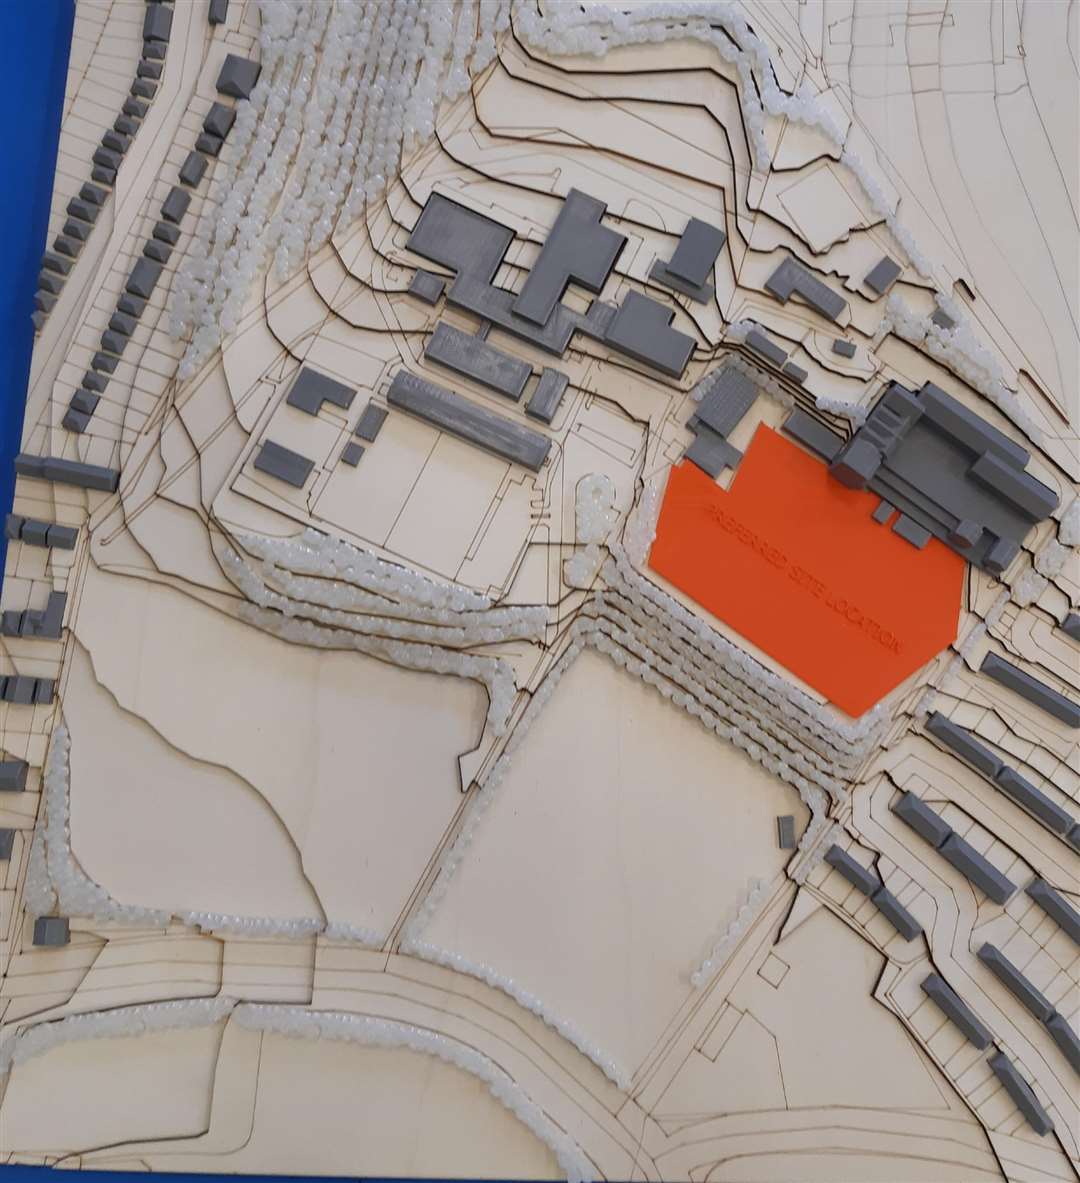 Plans for the new Dover Grammar School for Boys. The orange area is where the new building would be and the old school is behind it. To the left is Astor College